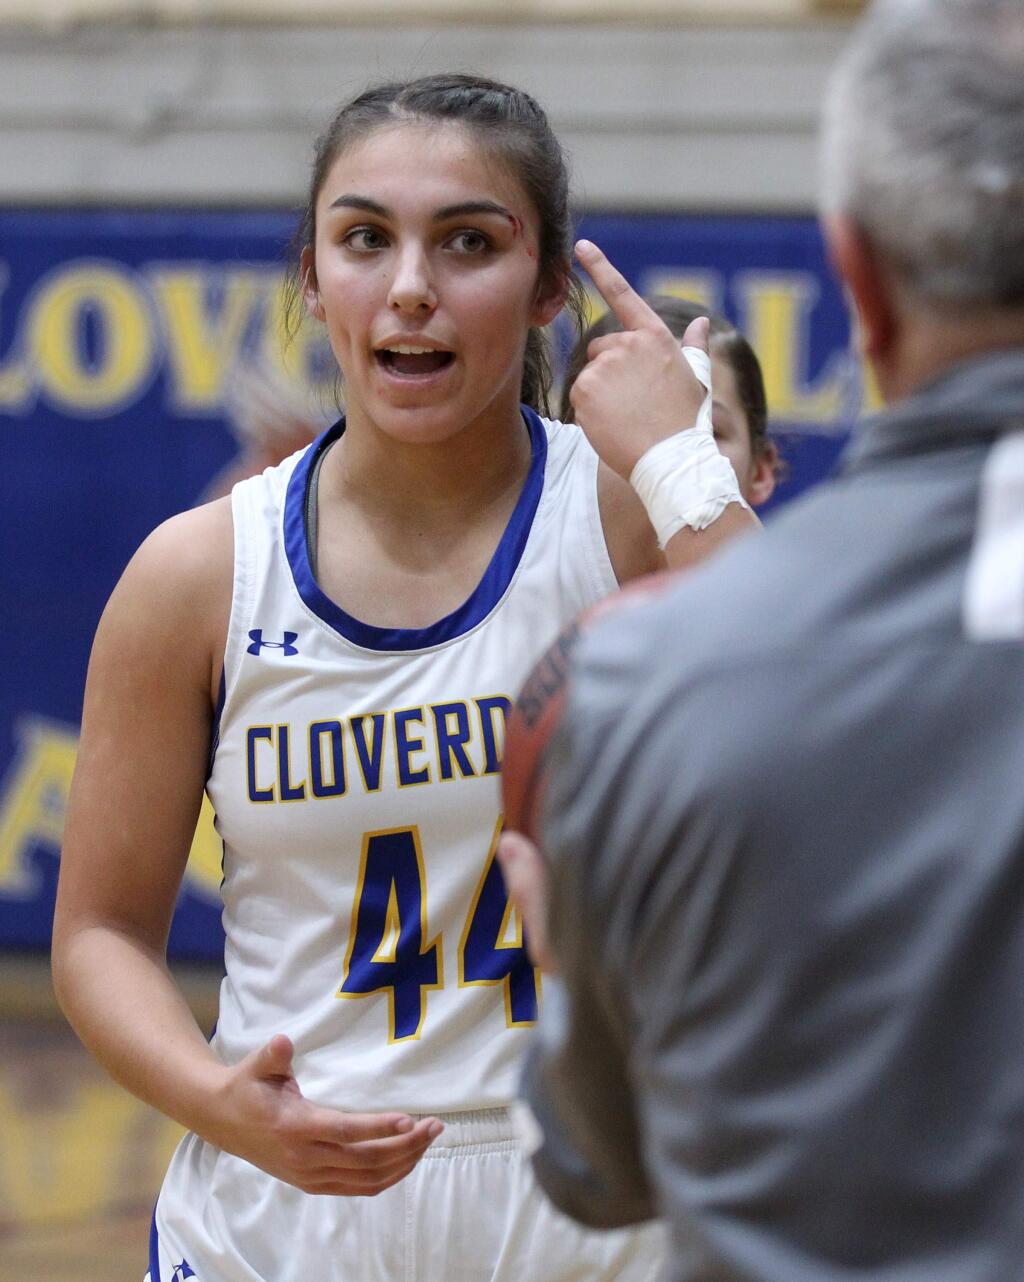 Cloverdale High School's Tehya Bird (44) points to a cut she received just after scoring her 2,000th point, against Middletown High School in Cloverdale on Friday, February 7, 2020. (Photo by Darryl Bush / For The Press Democrat)